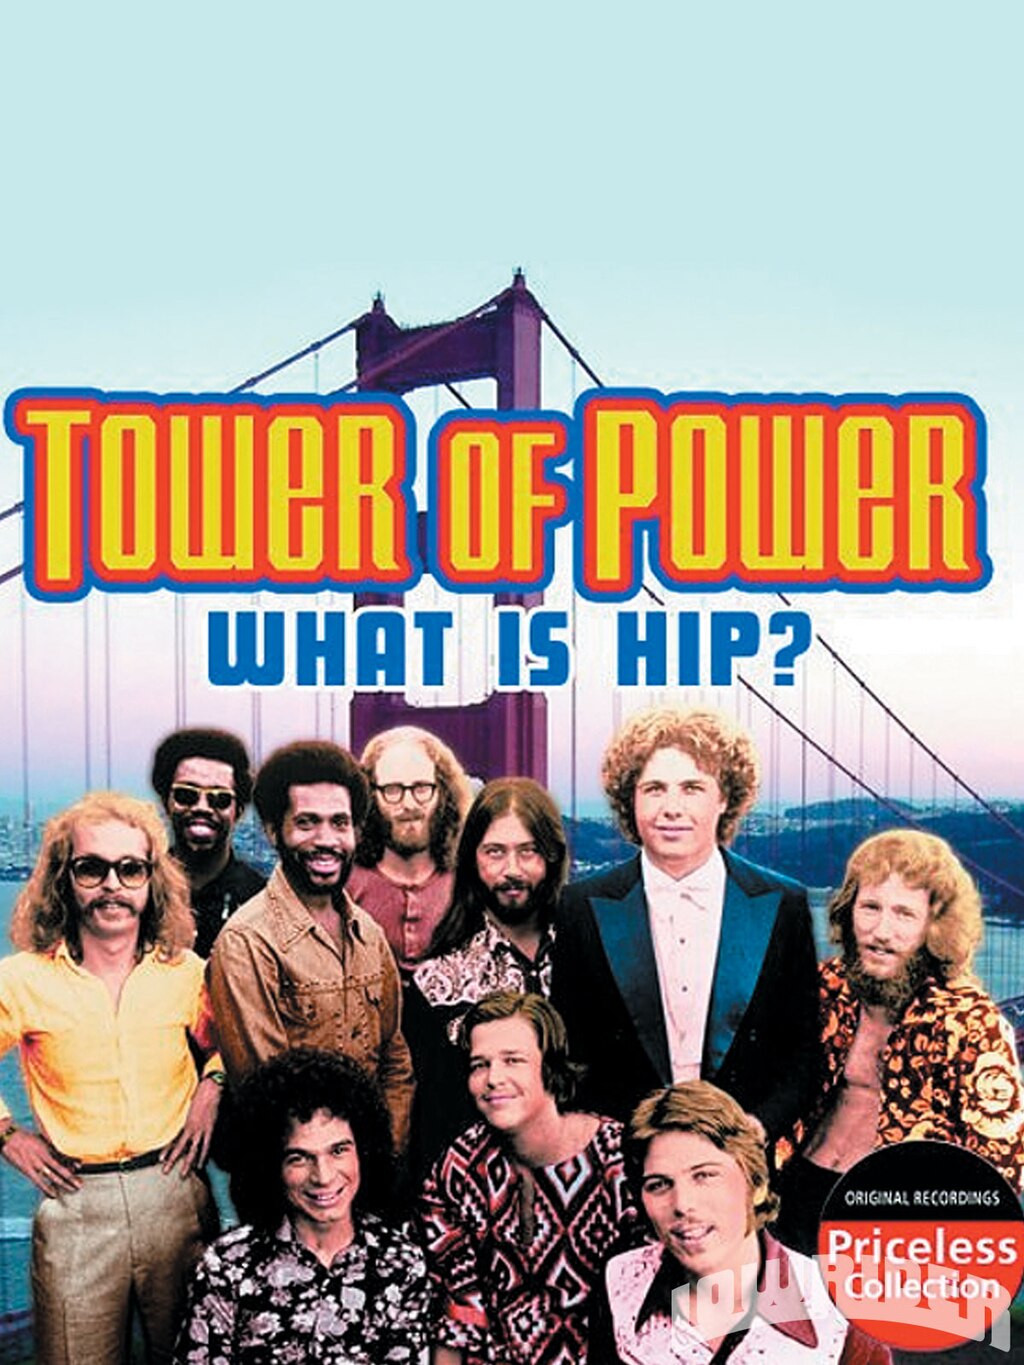 tower of power albums